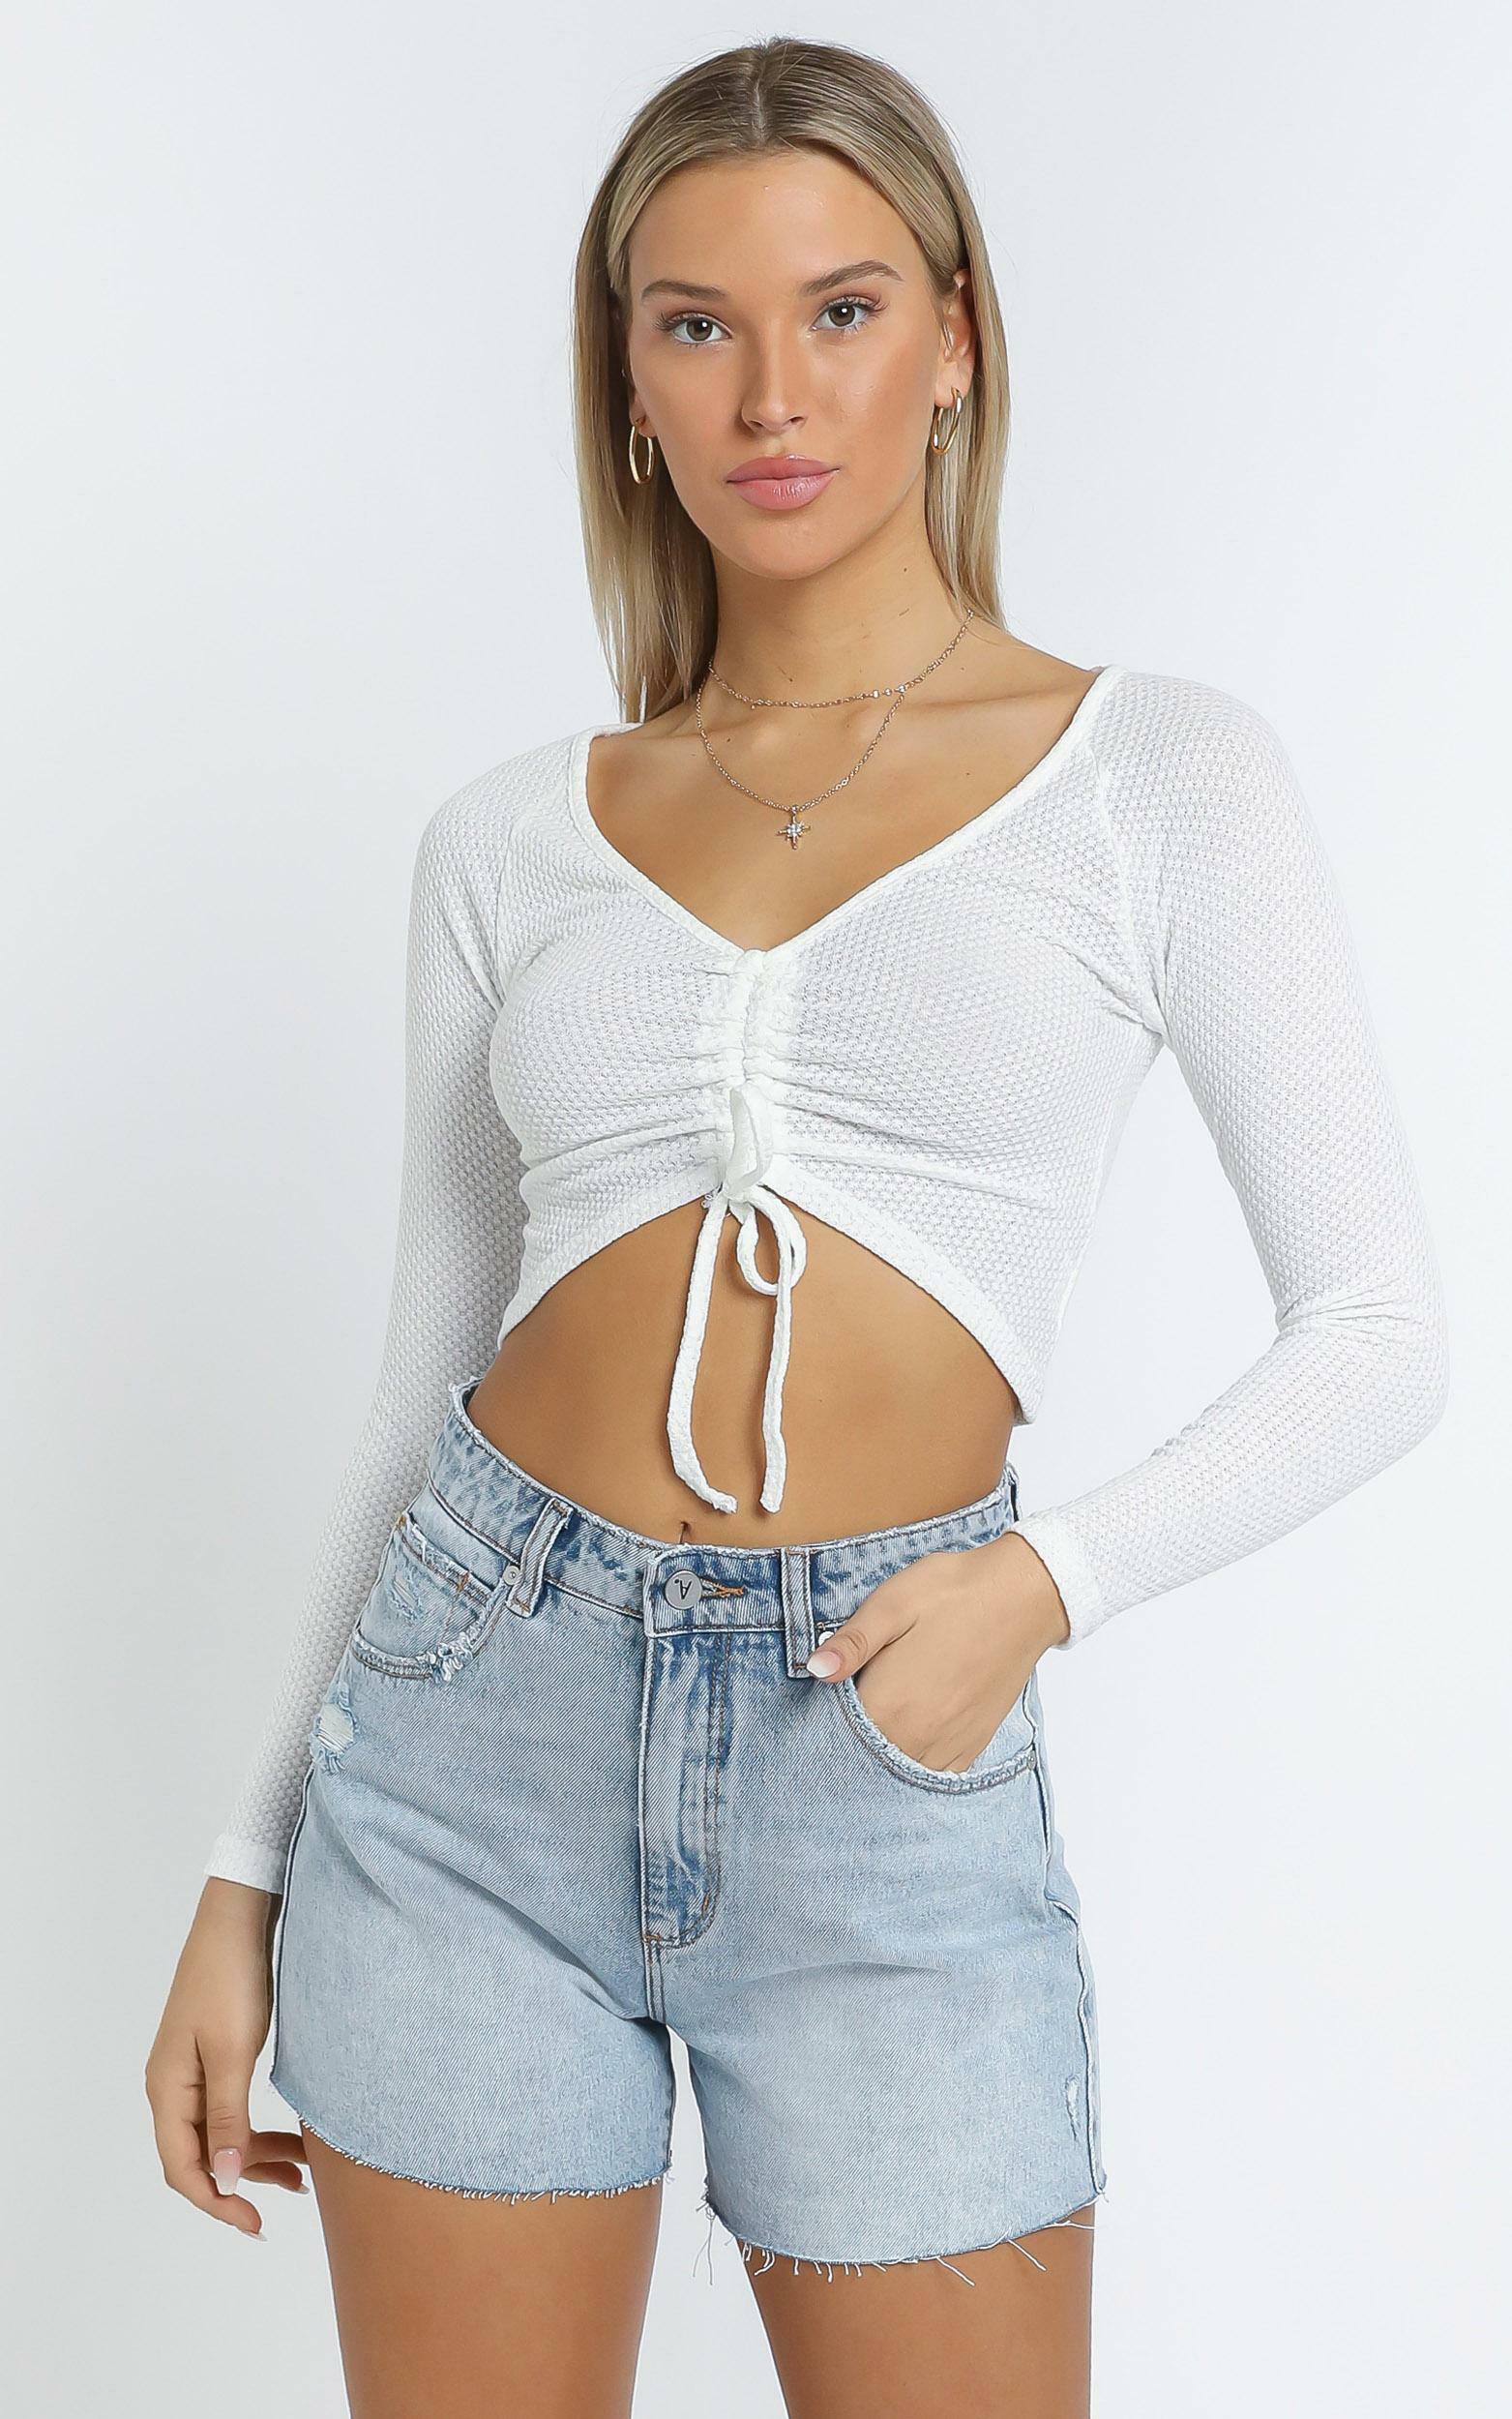 Ursula Top in White - 12 (L), White, hi-res image number null